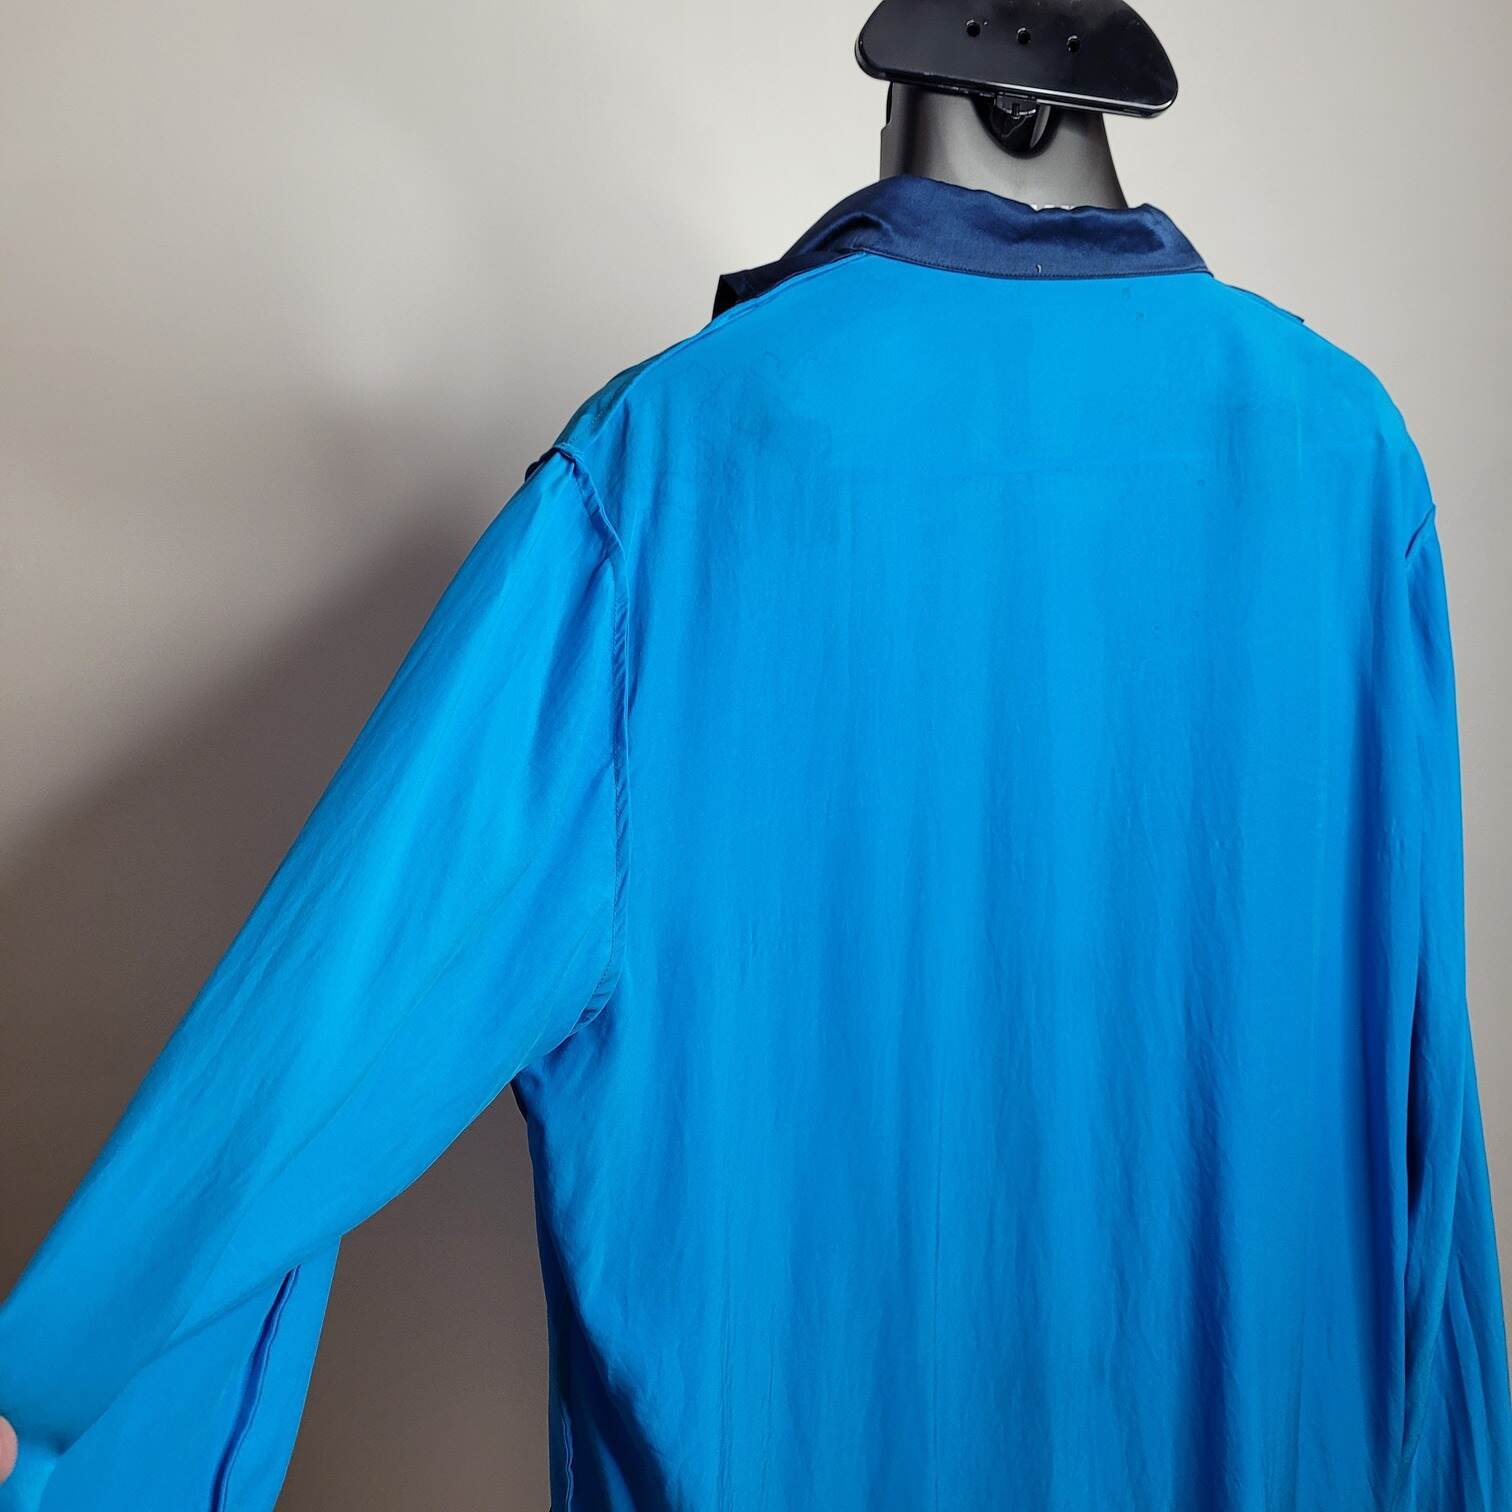 photo of a satin shirt turned inside out and hanging on a hanger on a steamer